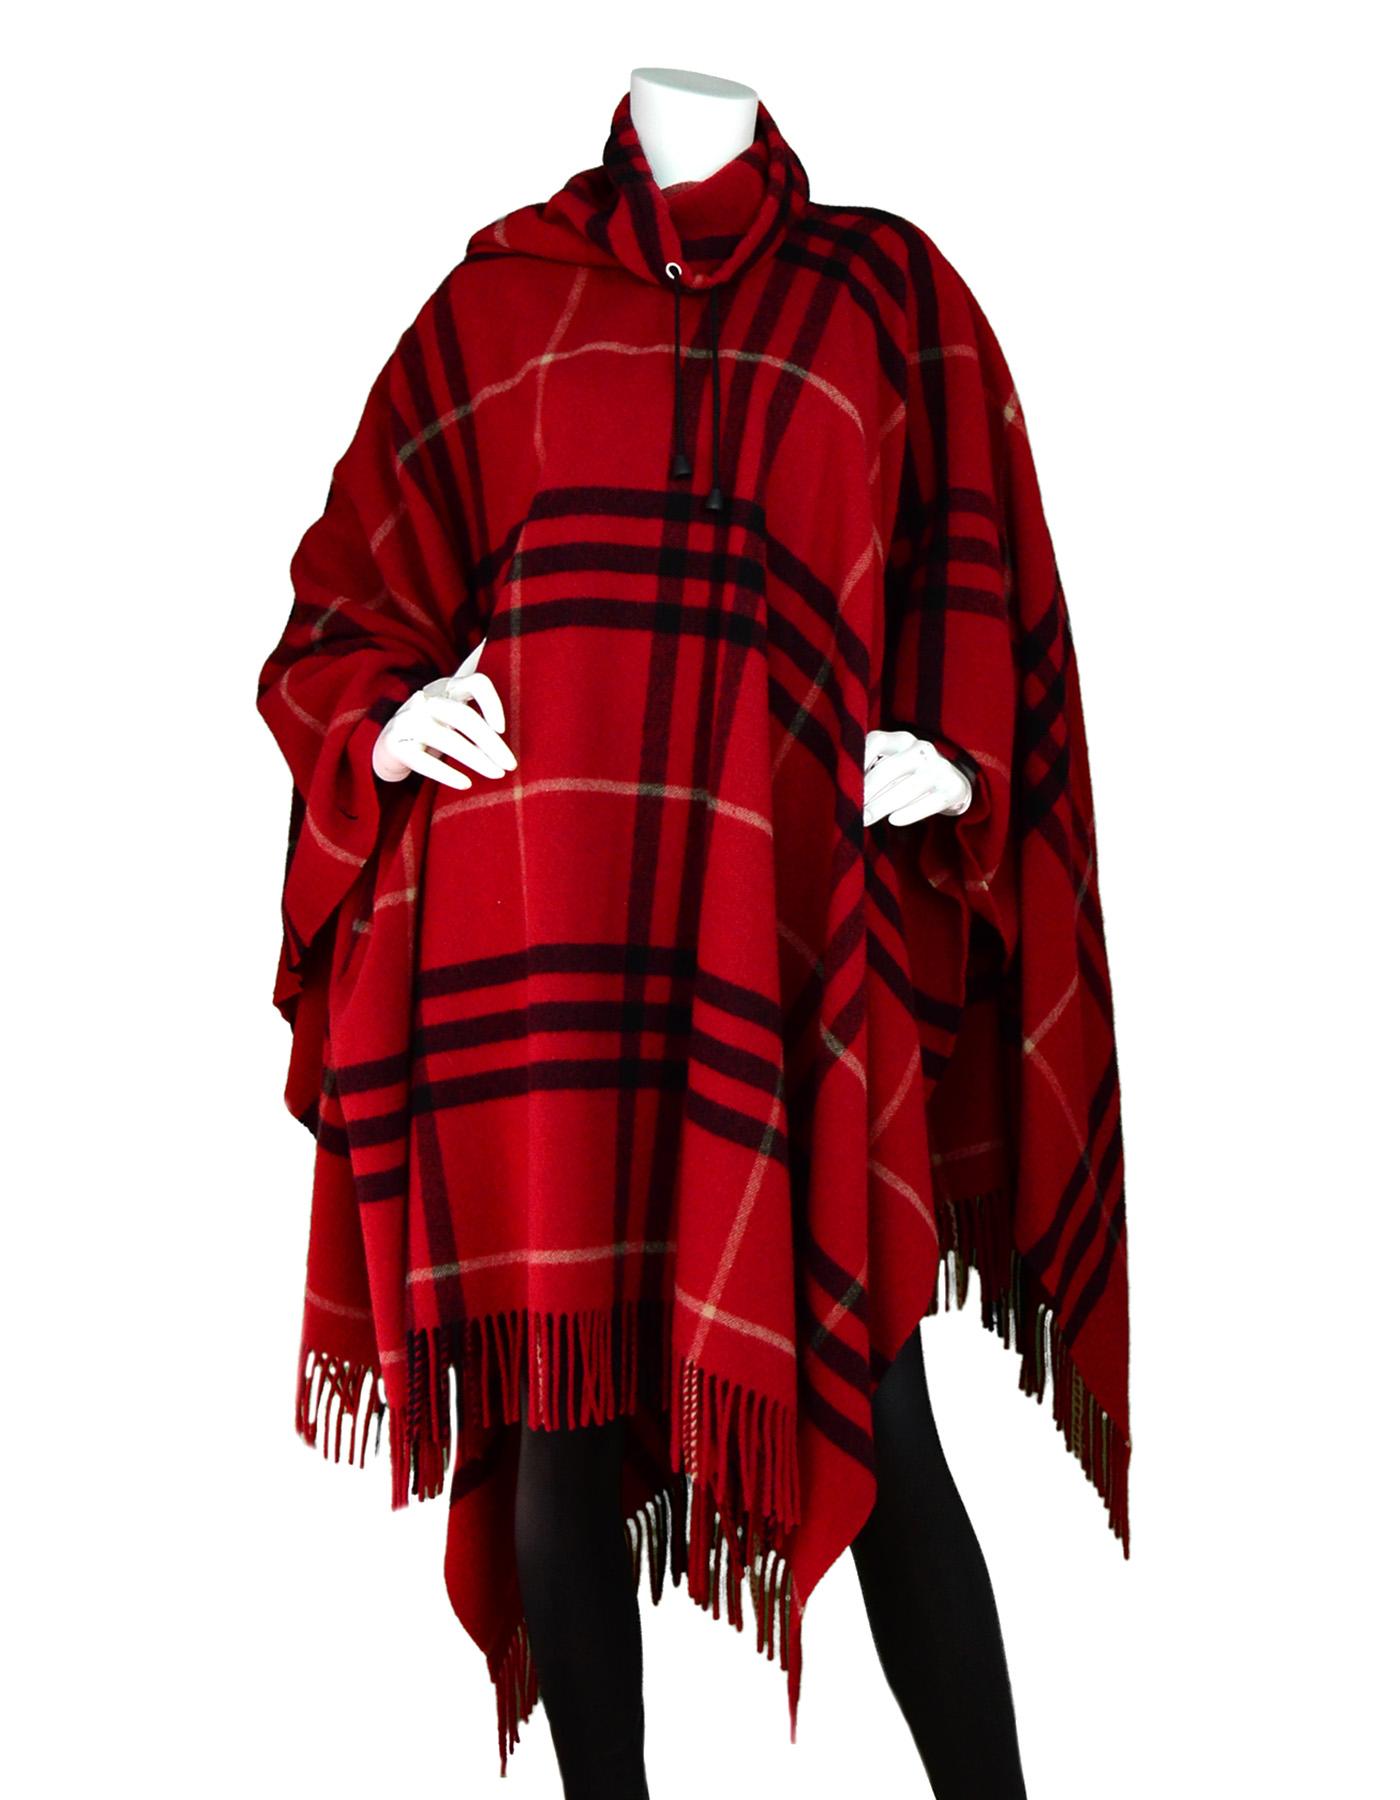 Burberry London Red/Black Nova Tartan Plaid Fringe Cowlneck Poncho One Size

Made In: England
Color: Red and Black
Materials: 100% Lambswool 
Opening/Closure: Pullover with drawstring, one button on each side of poncho 
Overall Condition: Excellent